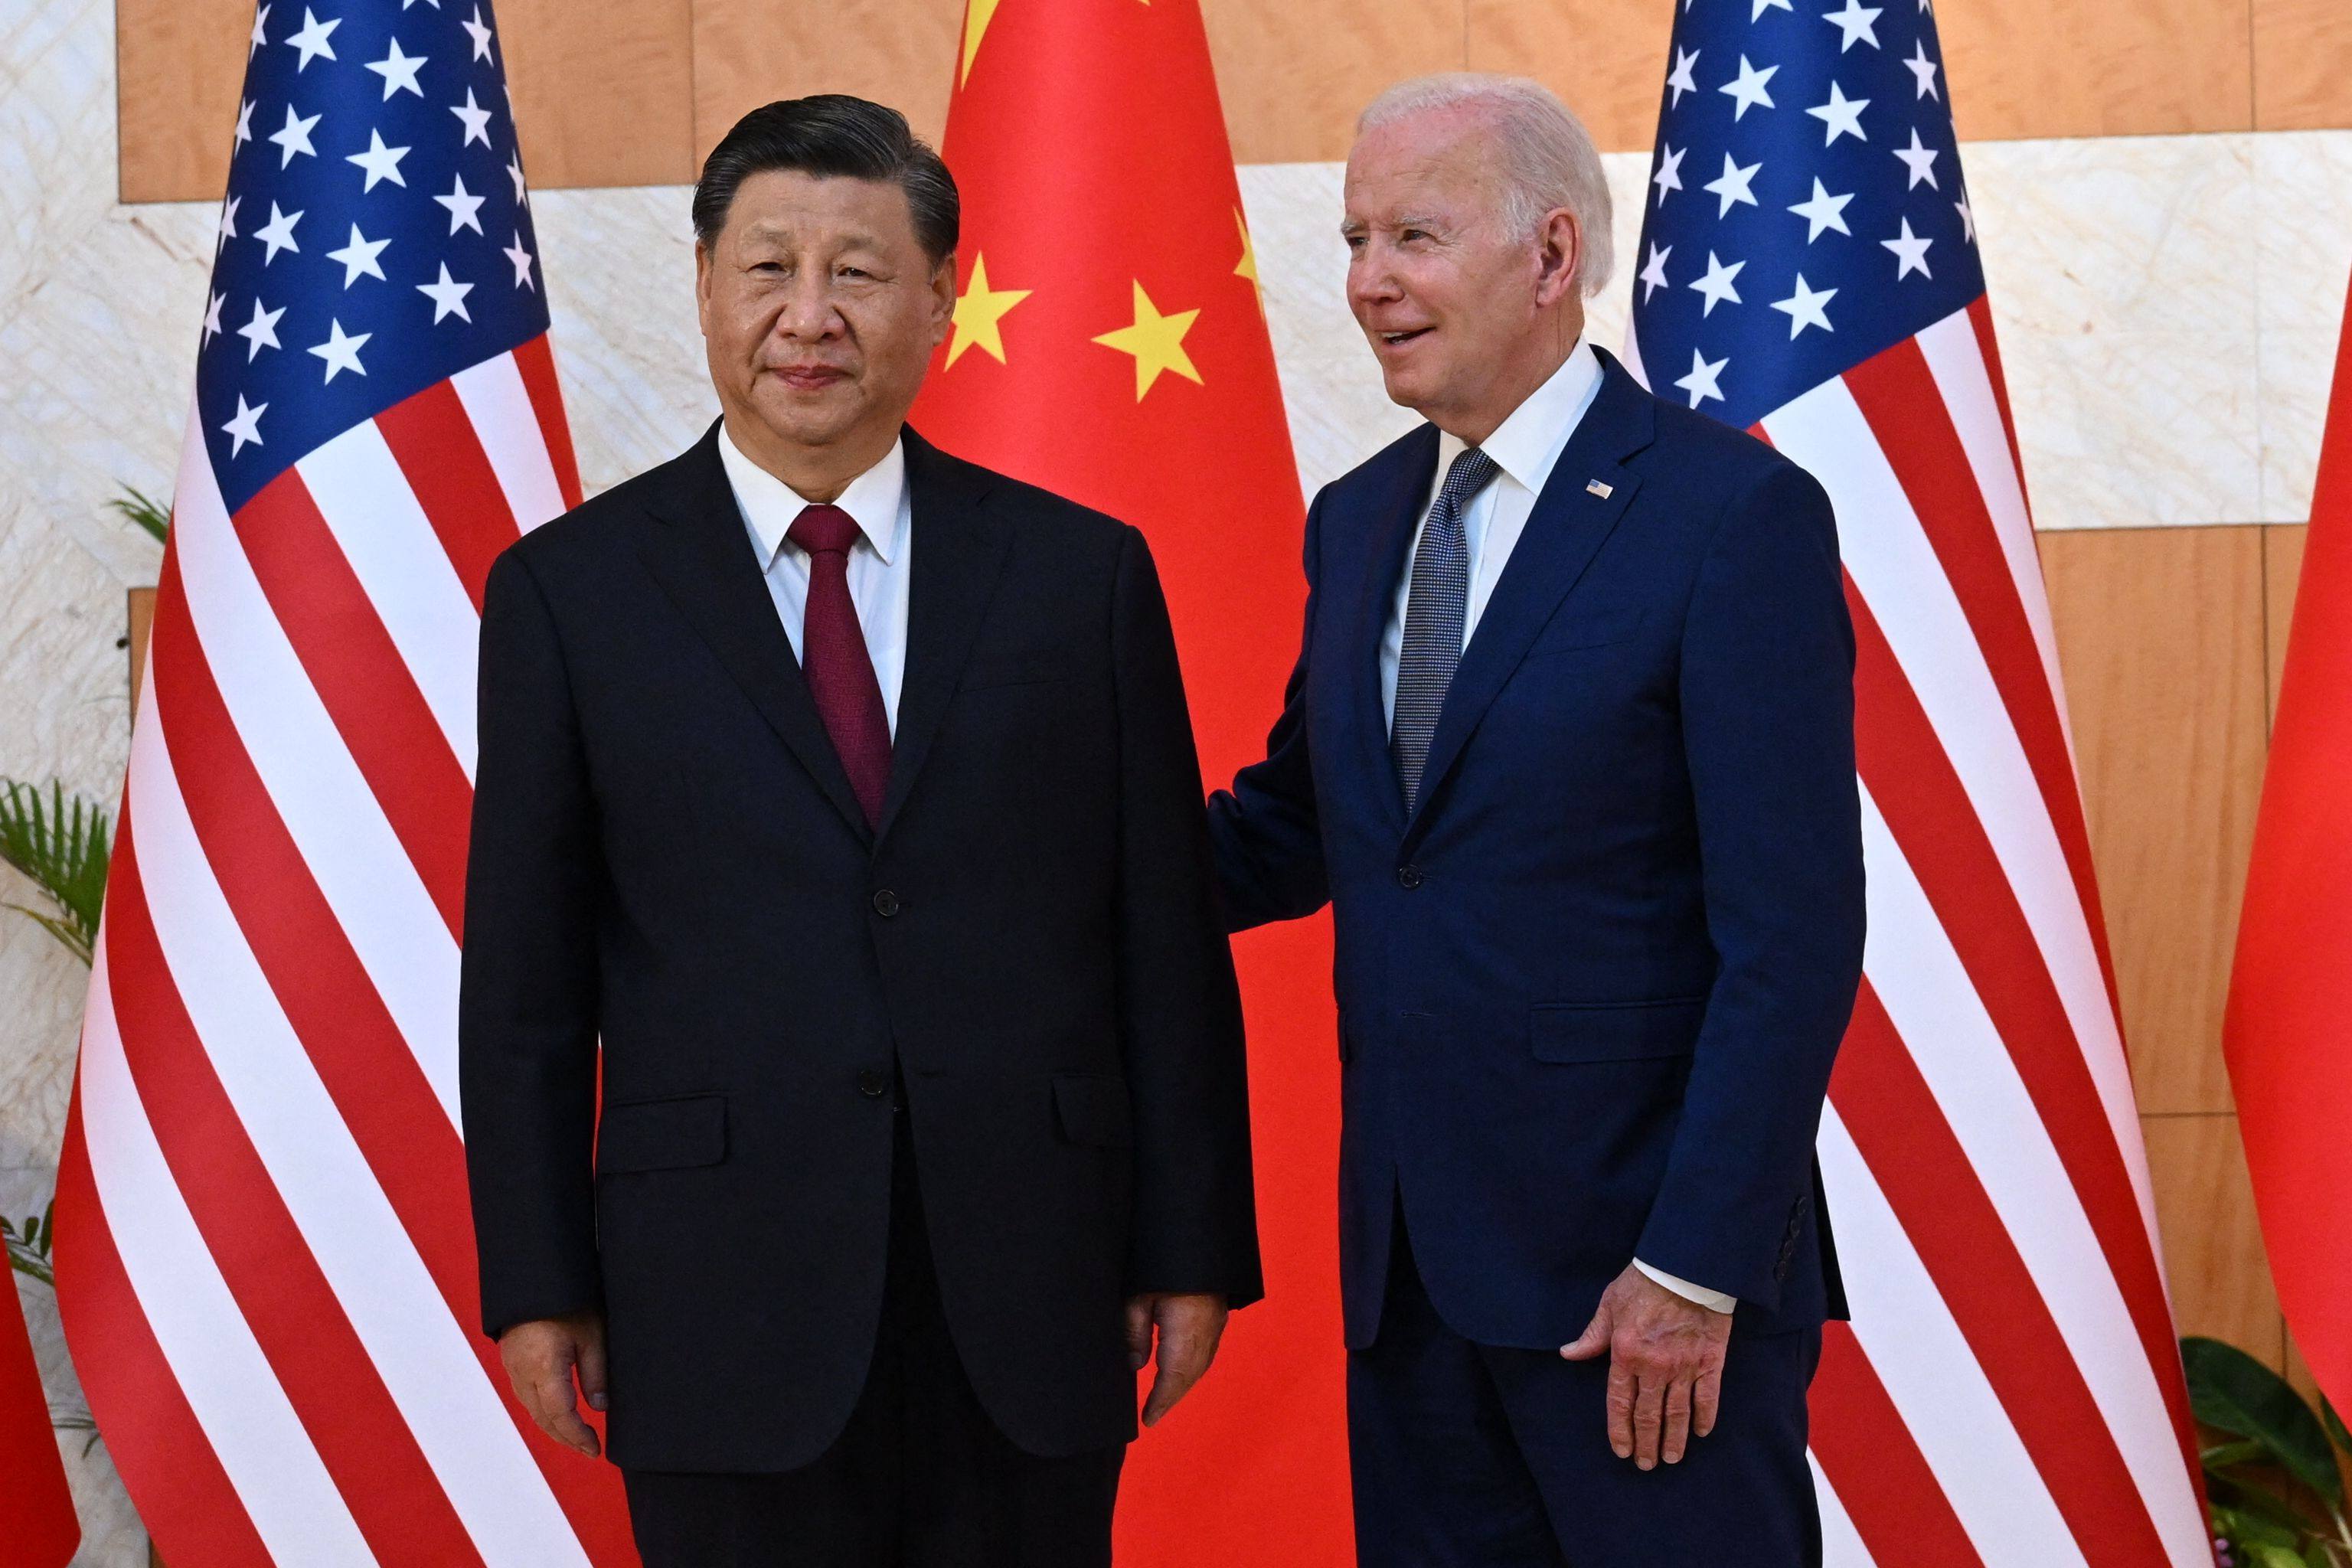 In this issue of the Global Impact newsletter, we ook at the state of US-China relations, and weighs up the possibility of a meeting between presidents Xi Jinping and Joe Biden at the Asia-Pacific Economic Cooperation summit in San Francisco later this month. Photo: AFP